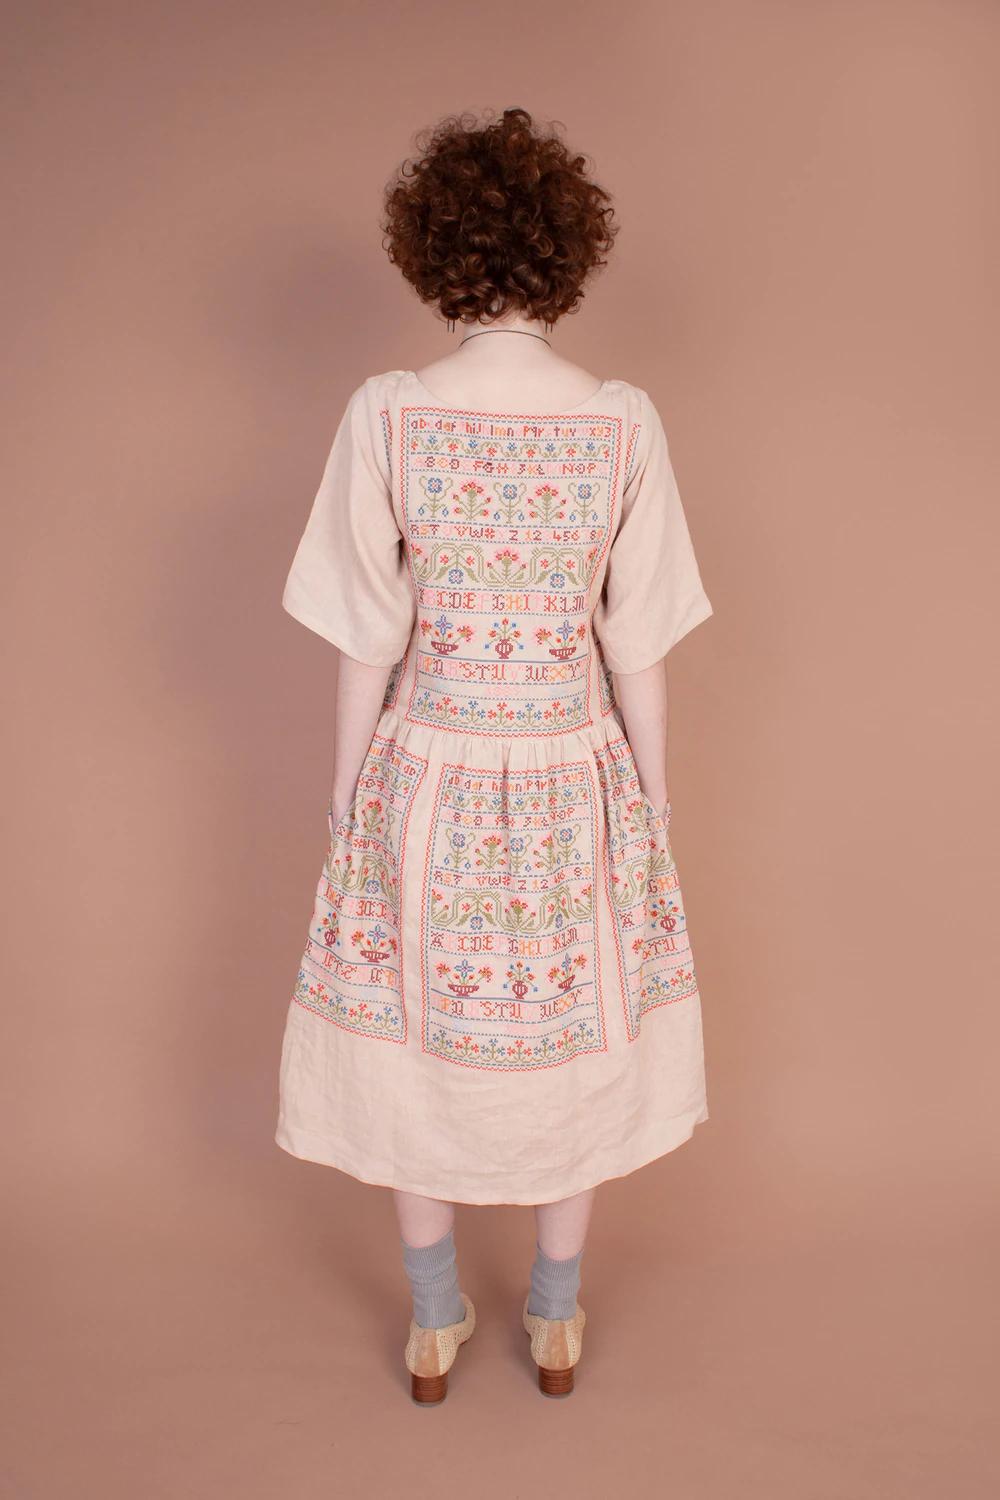 Product Image for Sampler Dress, Embroidery